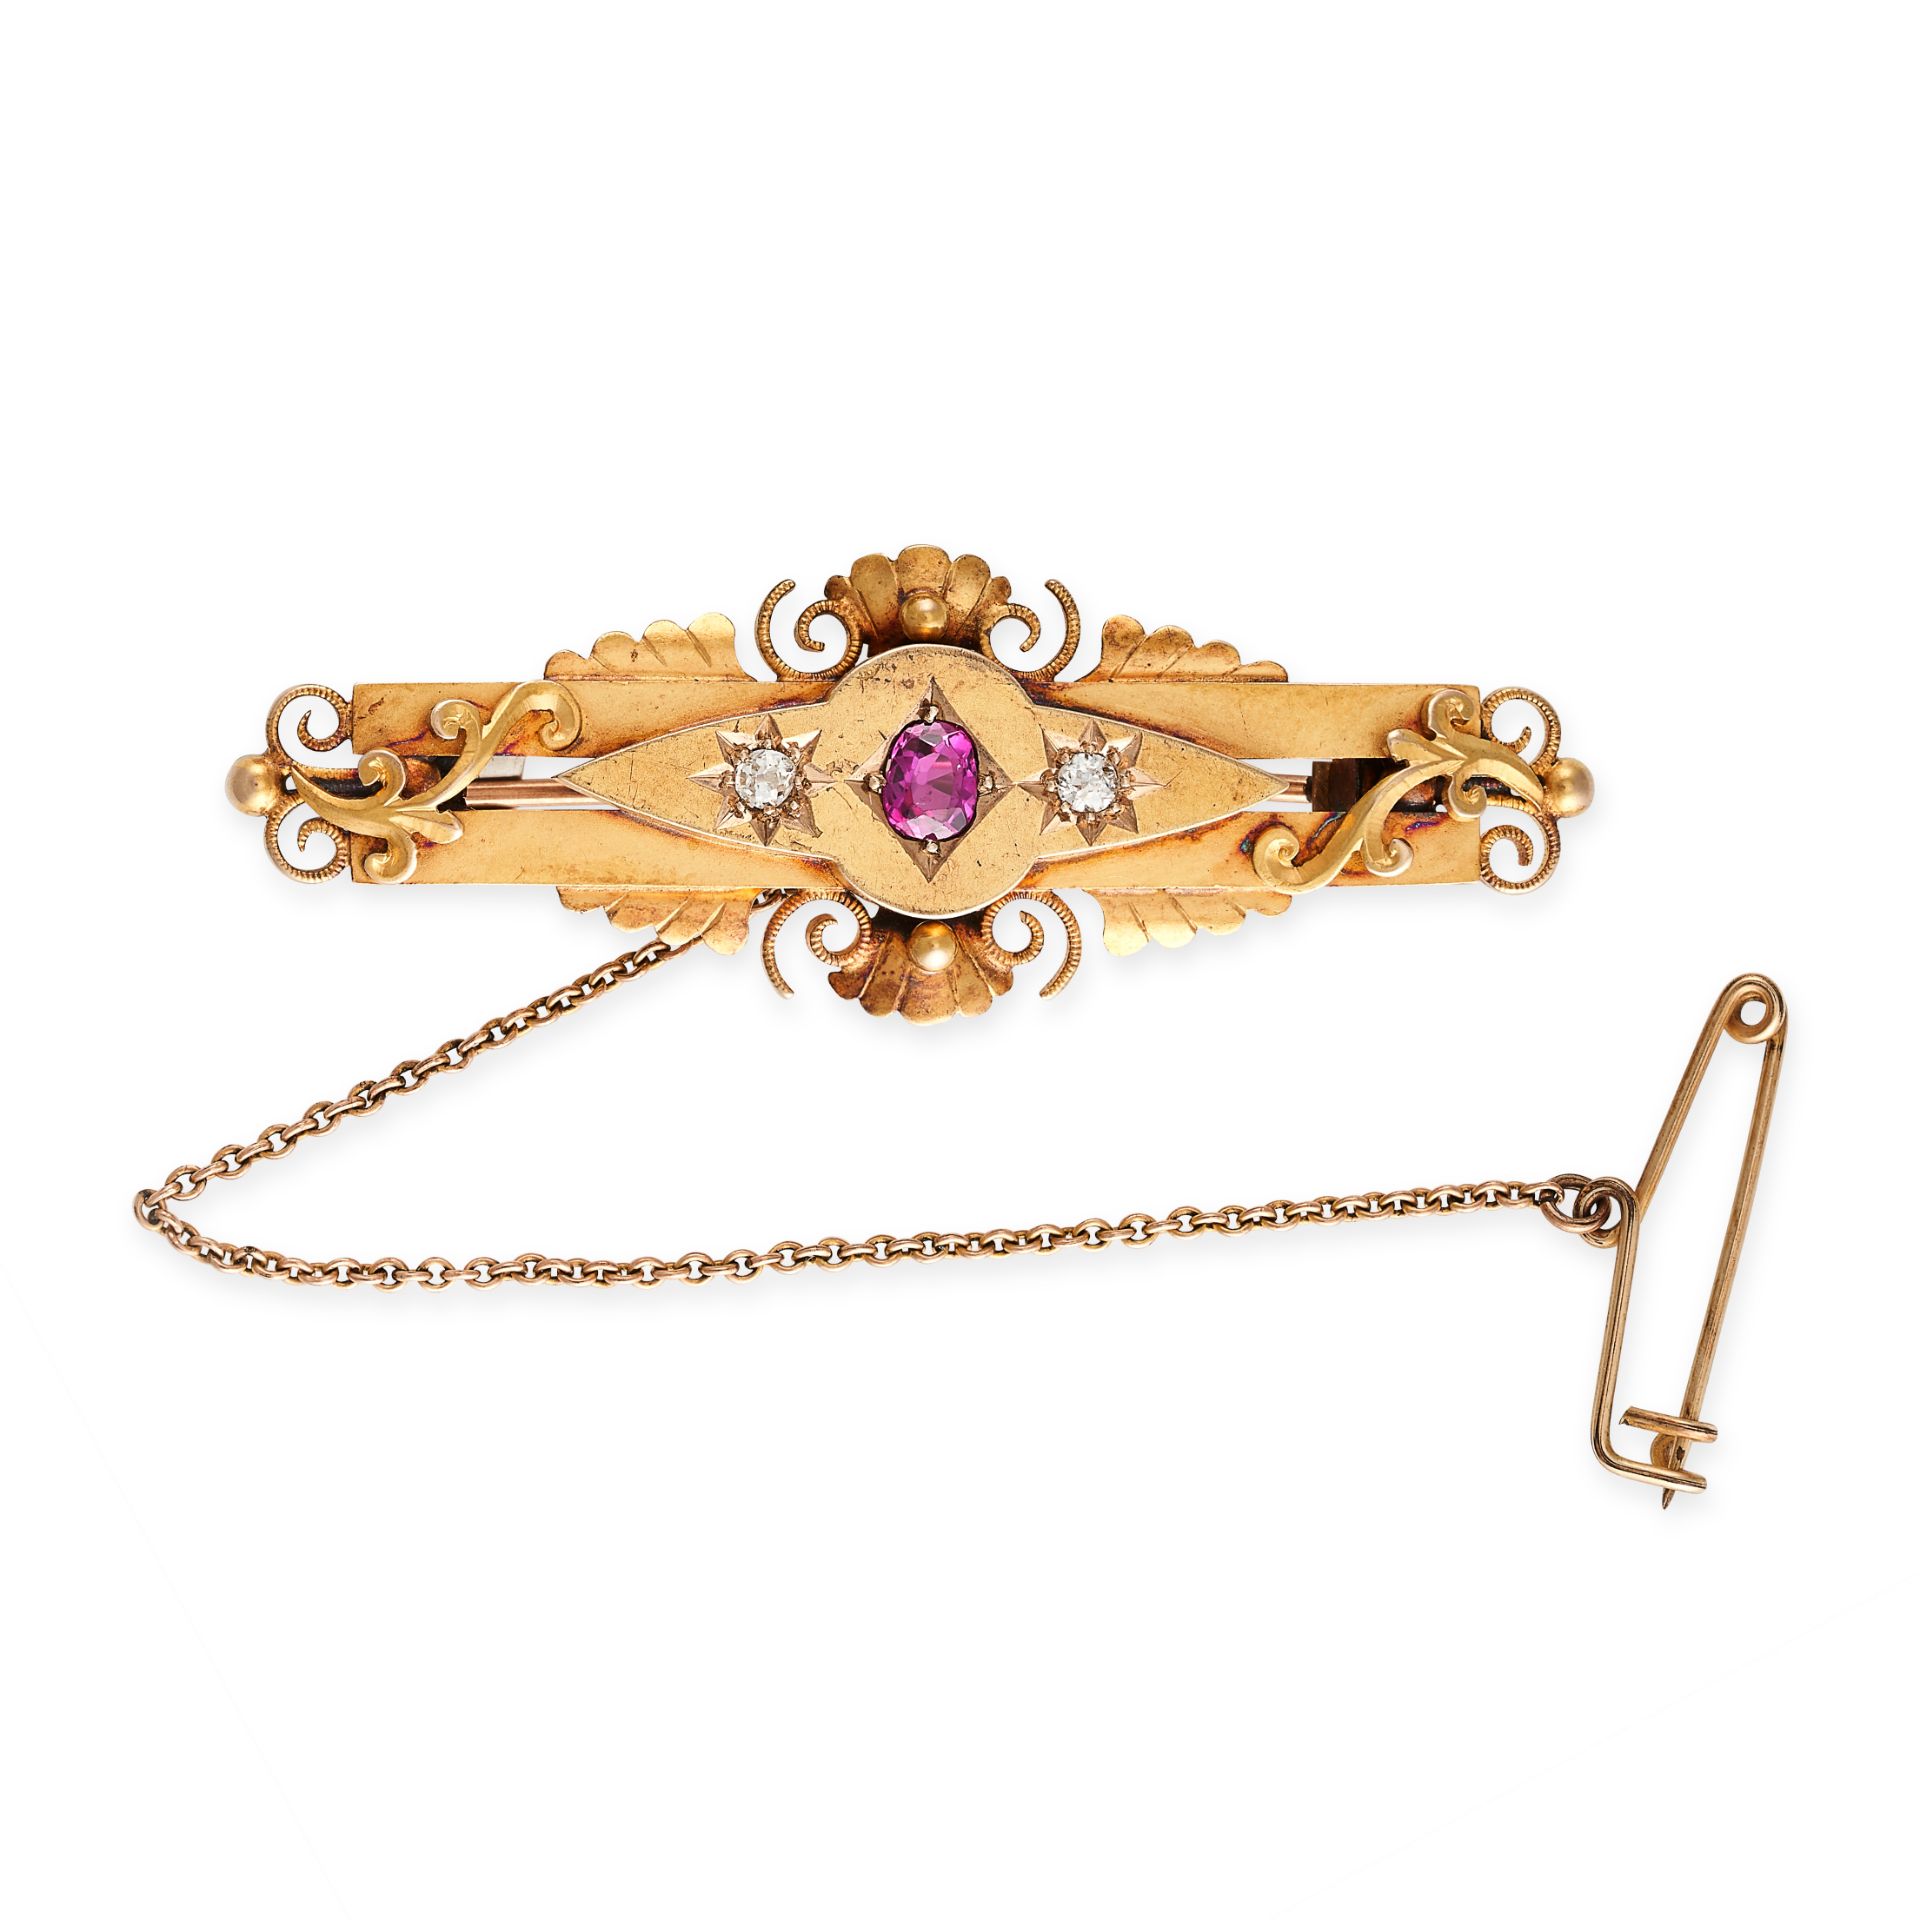 NO RESERVE - AN ANTIQUE EDWARDIAN RUBY AND DIAMOND BROOCH, 1906 in 15ct yellow gold, set with a